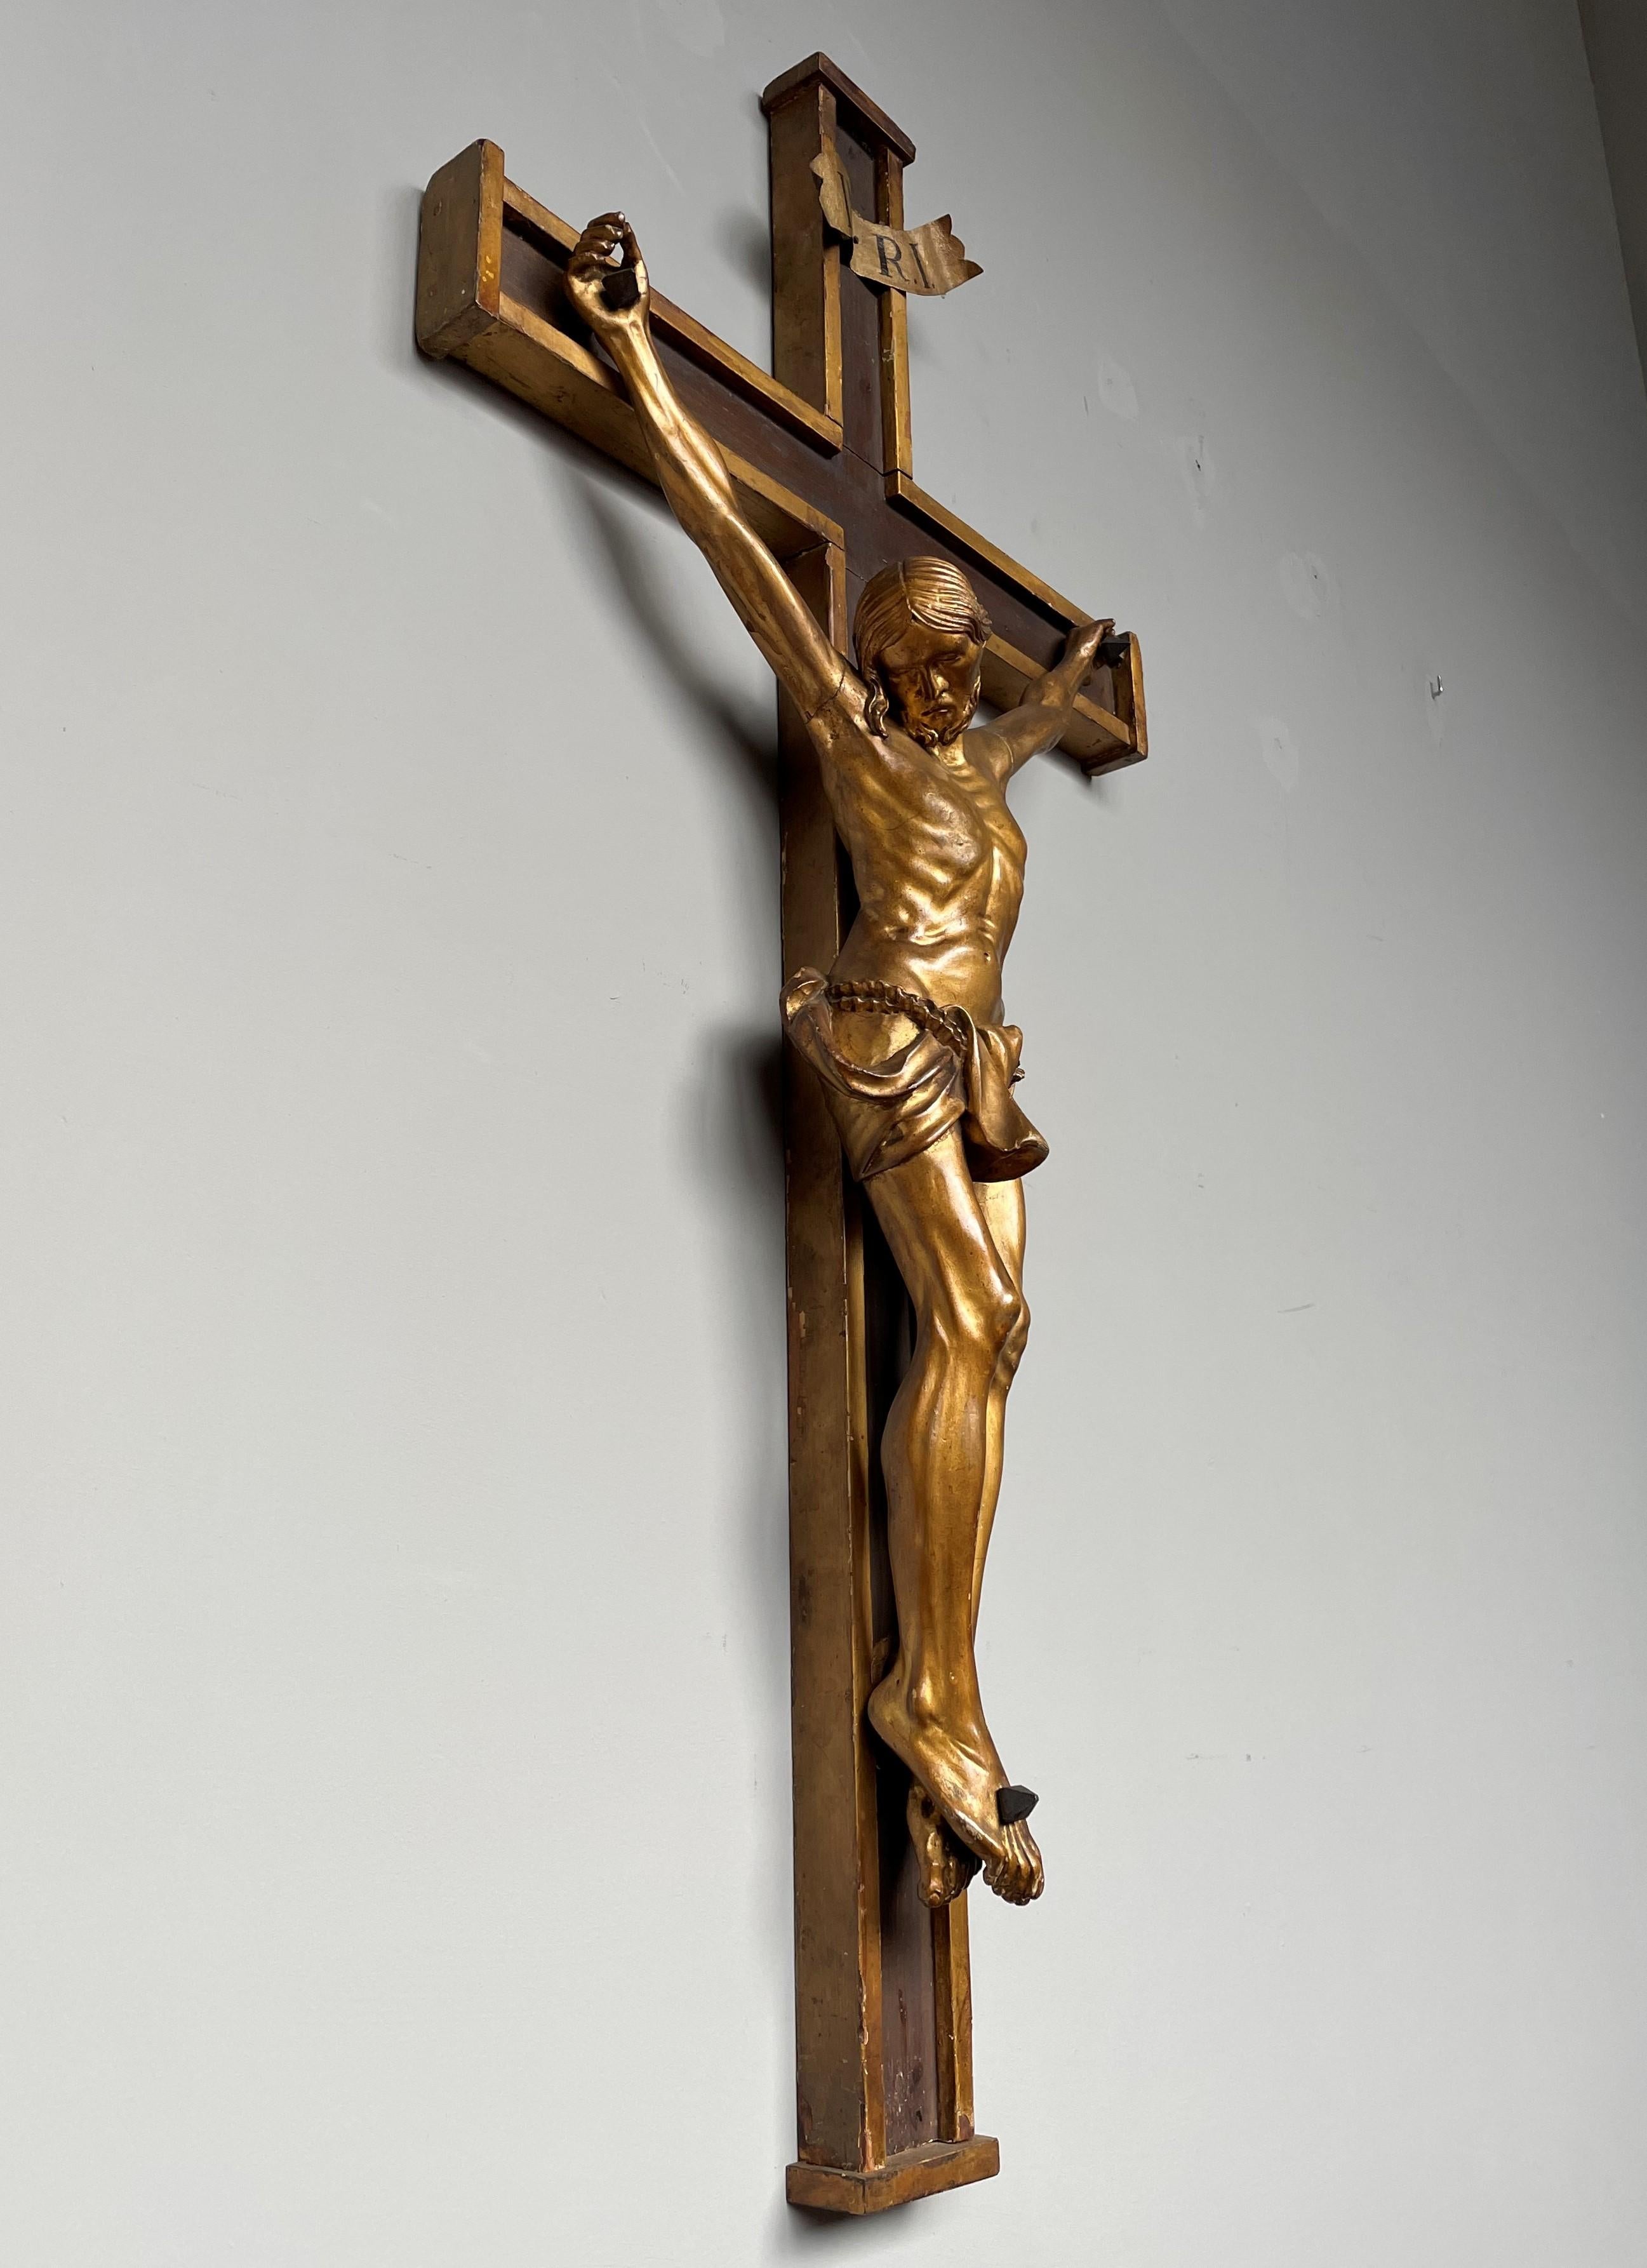 Large and impressive hand-crafted church crucifix.

This beautifully handcrafted crucifix for wall mounting comes with a top quality carved wooden corpus of Christ and especially for its age the gilding is in amazing condition. Both the quality of